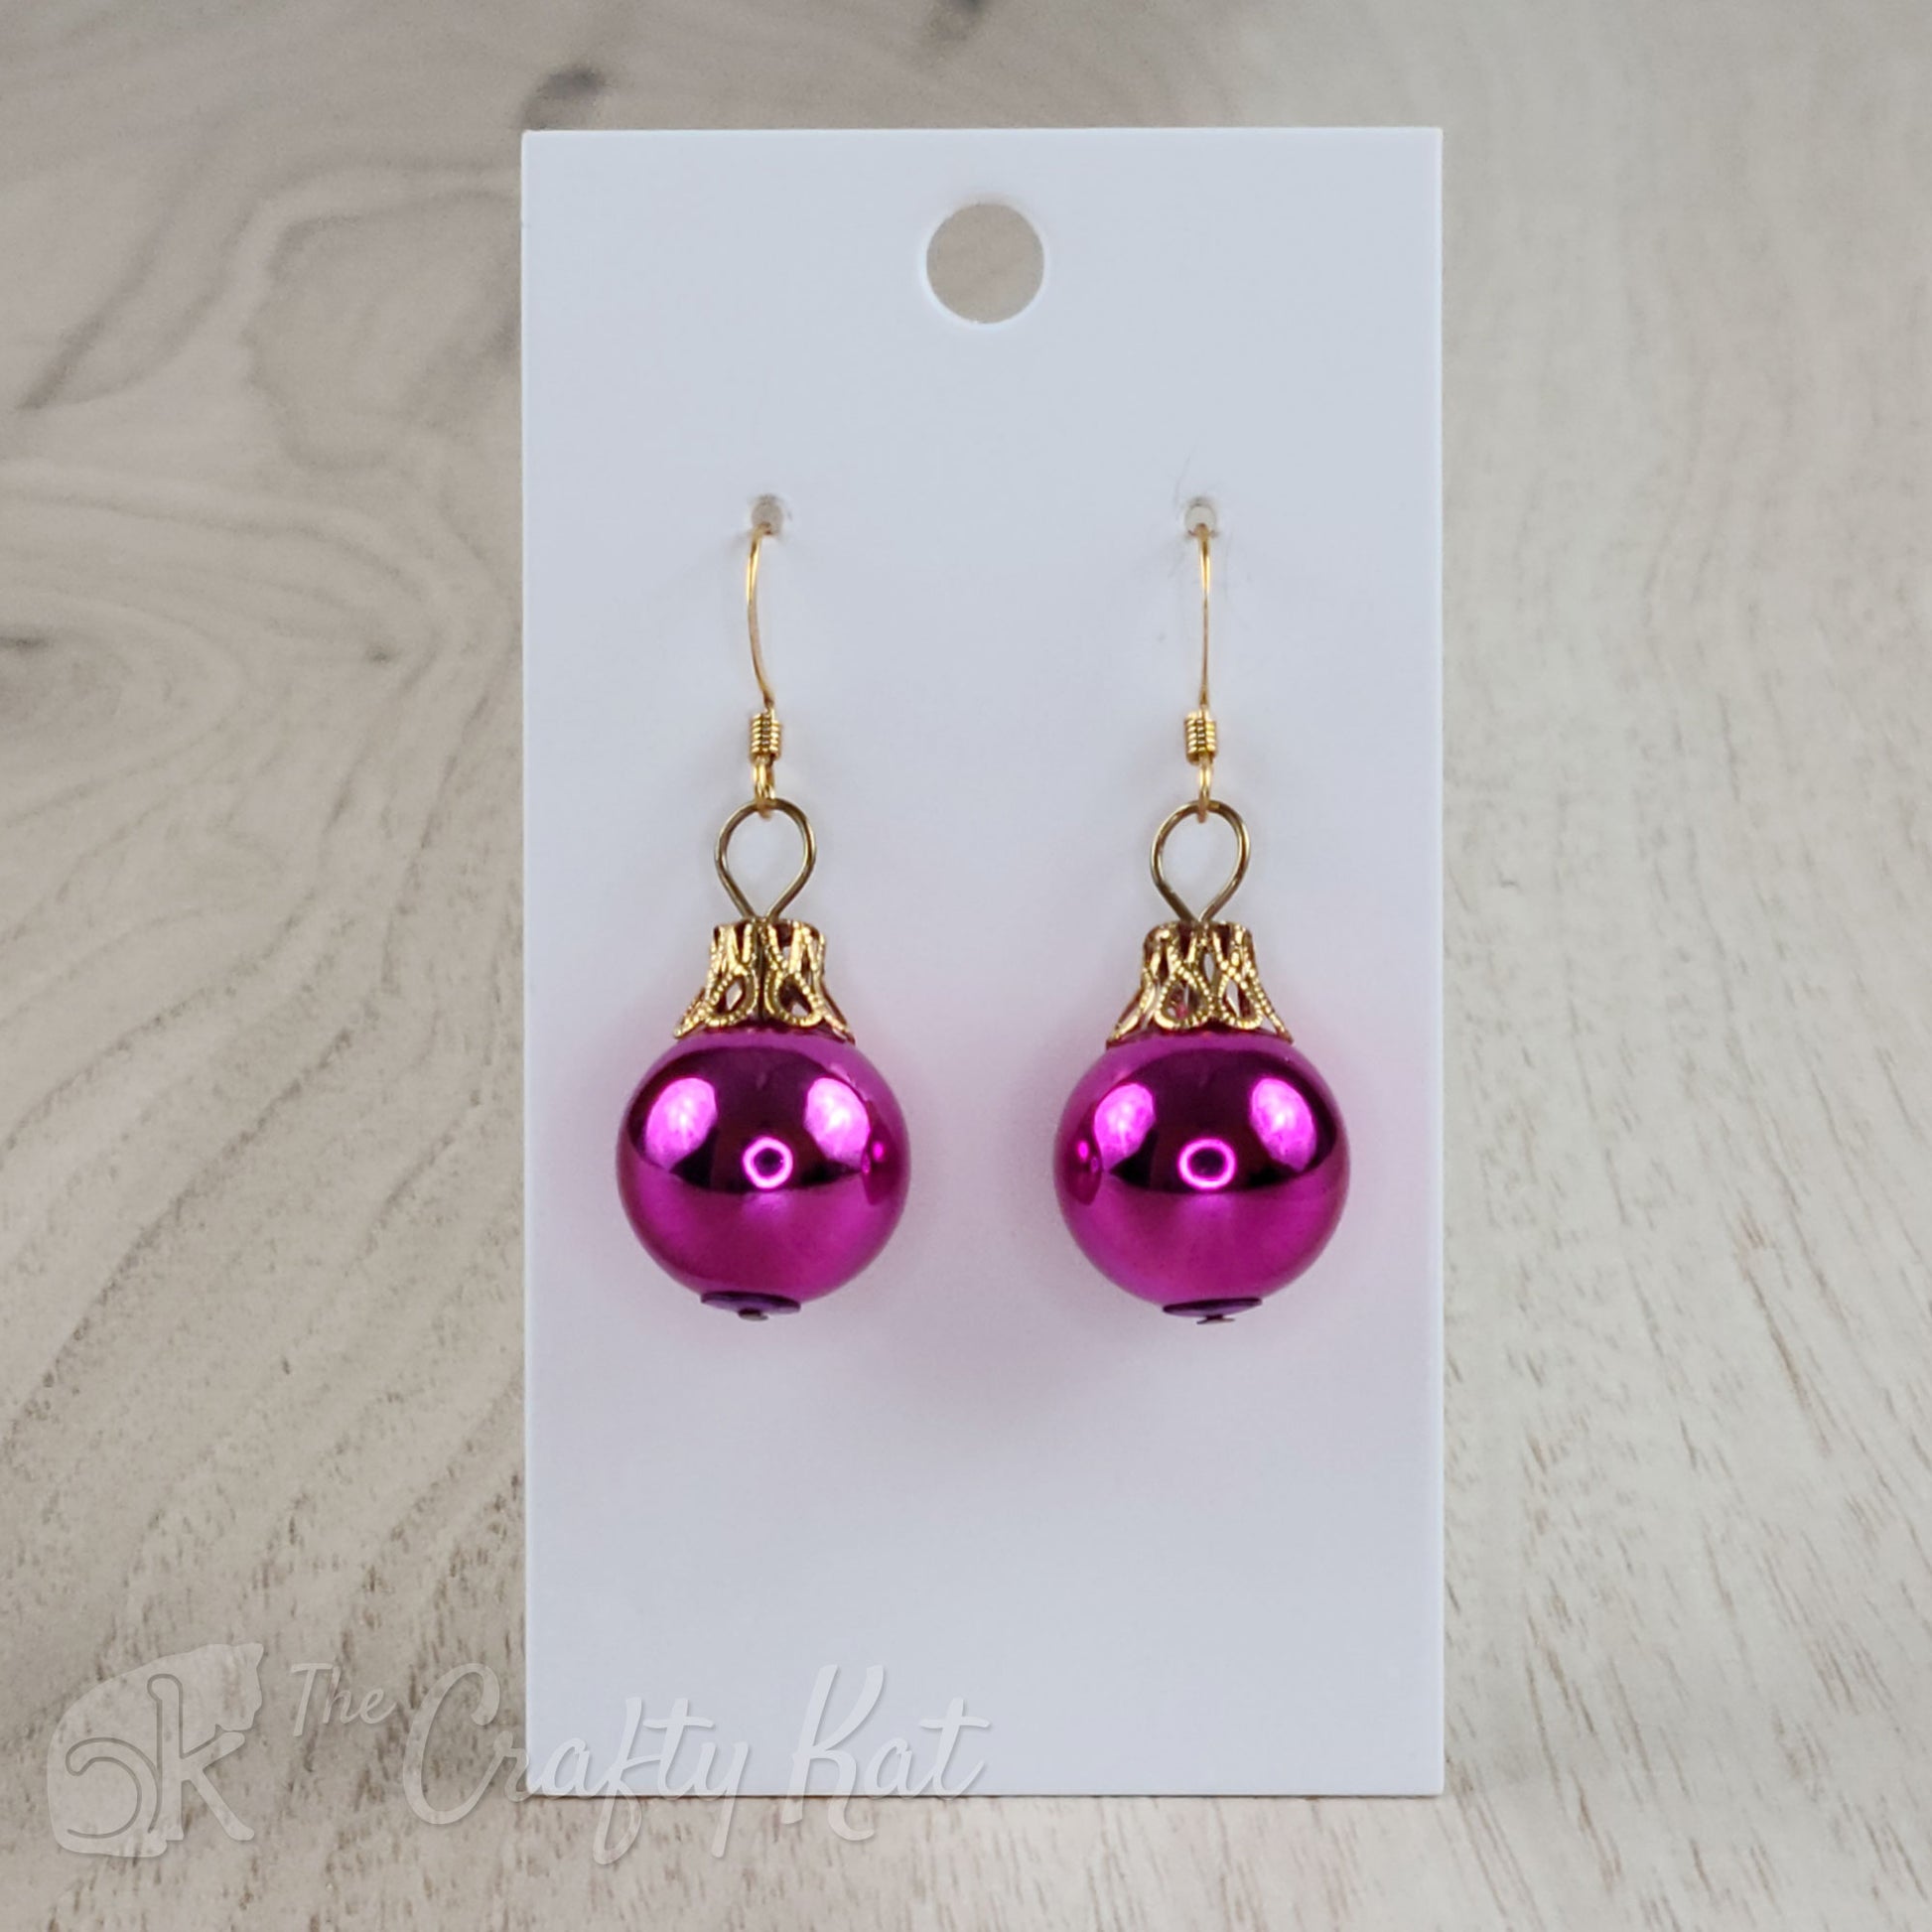 Each earring is a magenta globe with a gold-plated filigree cap, giving each the appearance of a classic holiday tree ornament.